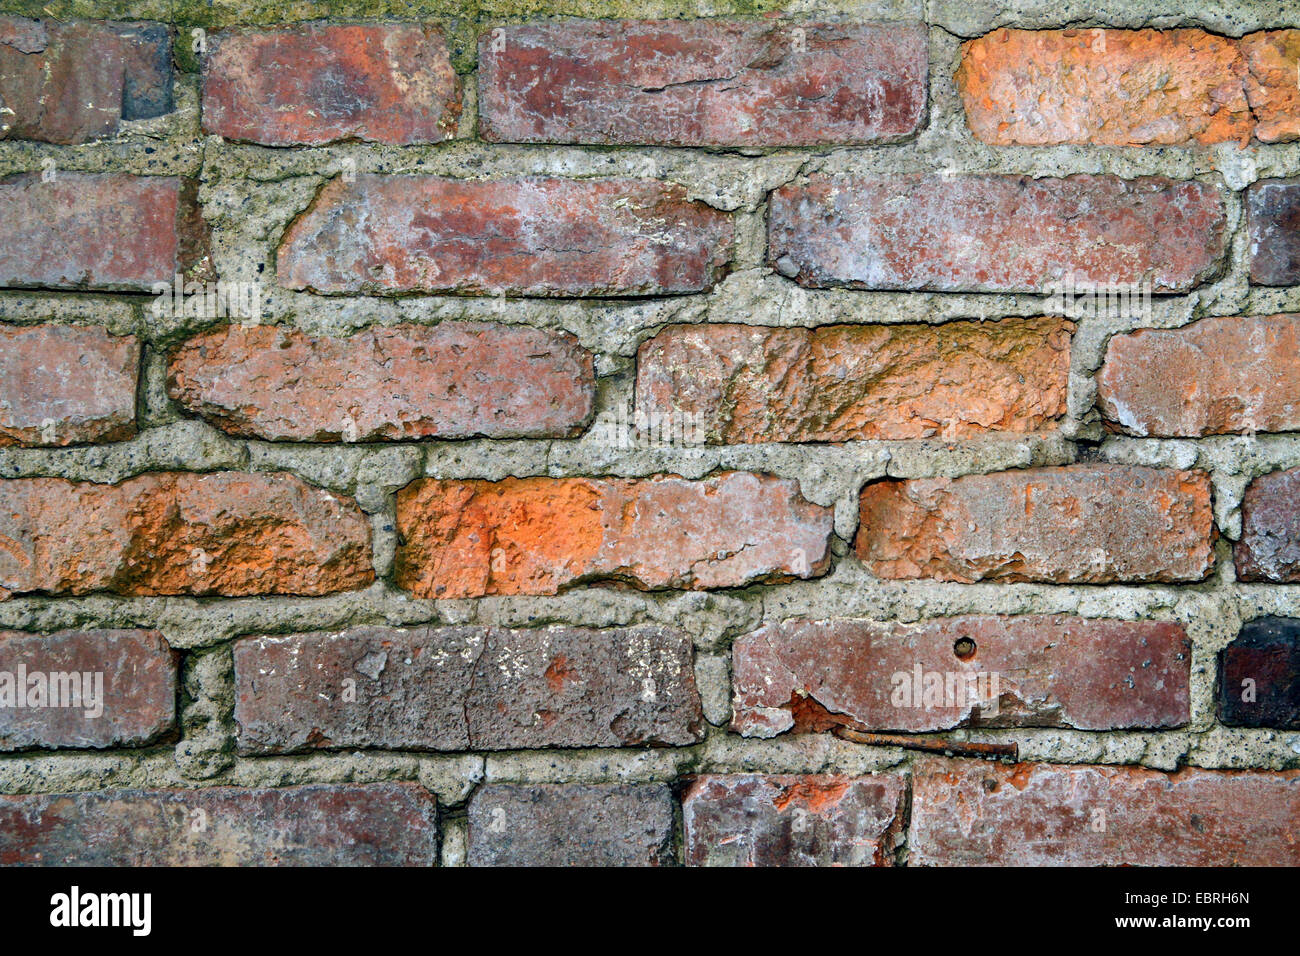 section of a weathered red brick wall, Germany Stock Photo